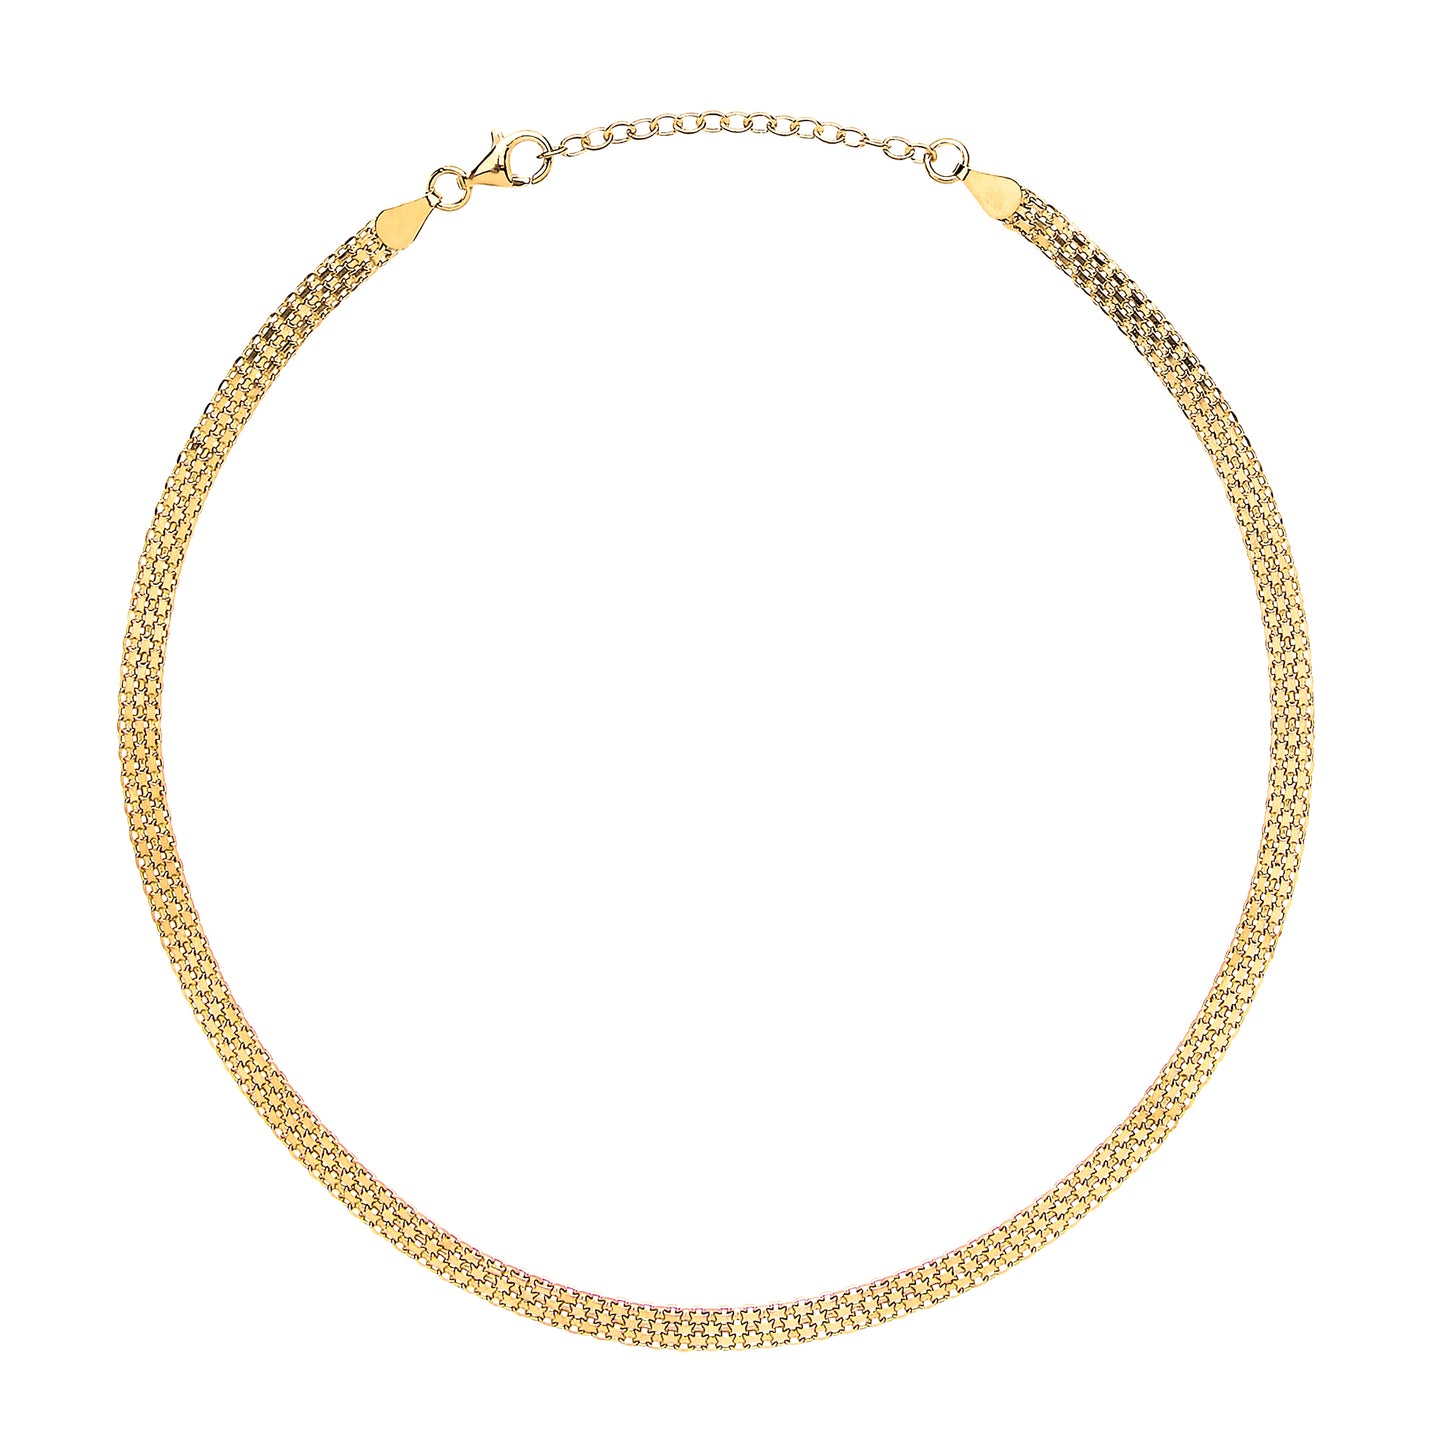 Gilded Silver  Bismark Flat Cage Collarette Necklace 5mm 14-16" - GVCL005G